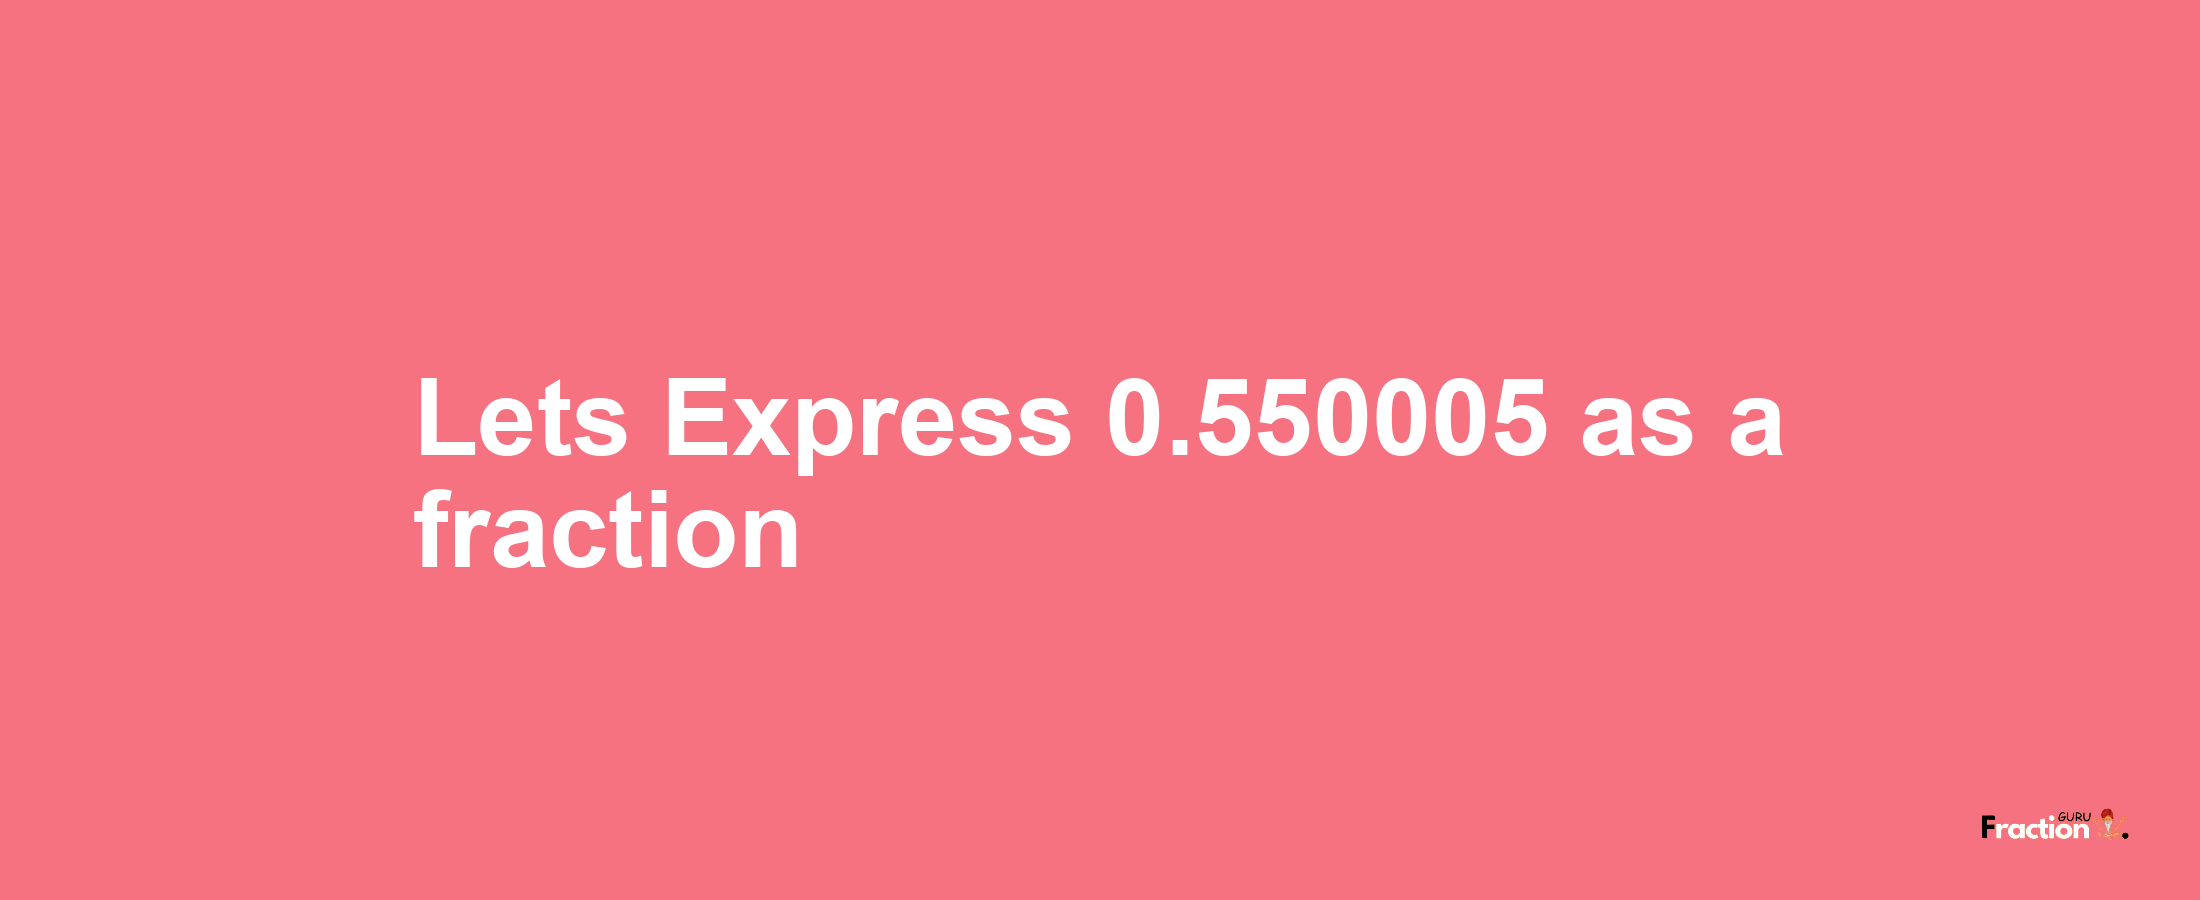 Lets Express 0.550005 as afraction